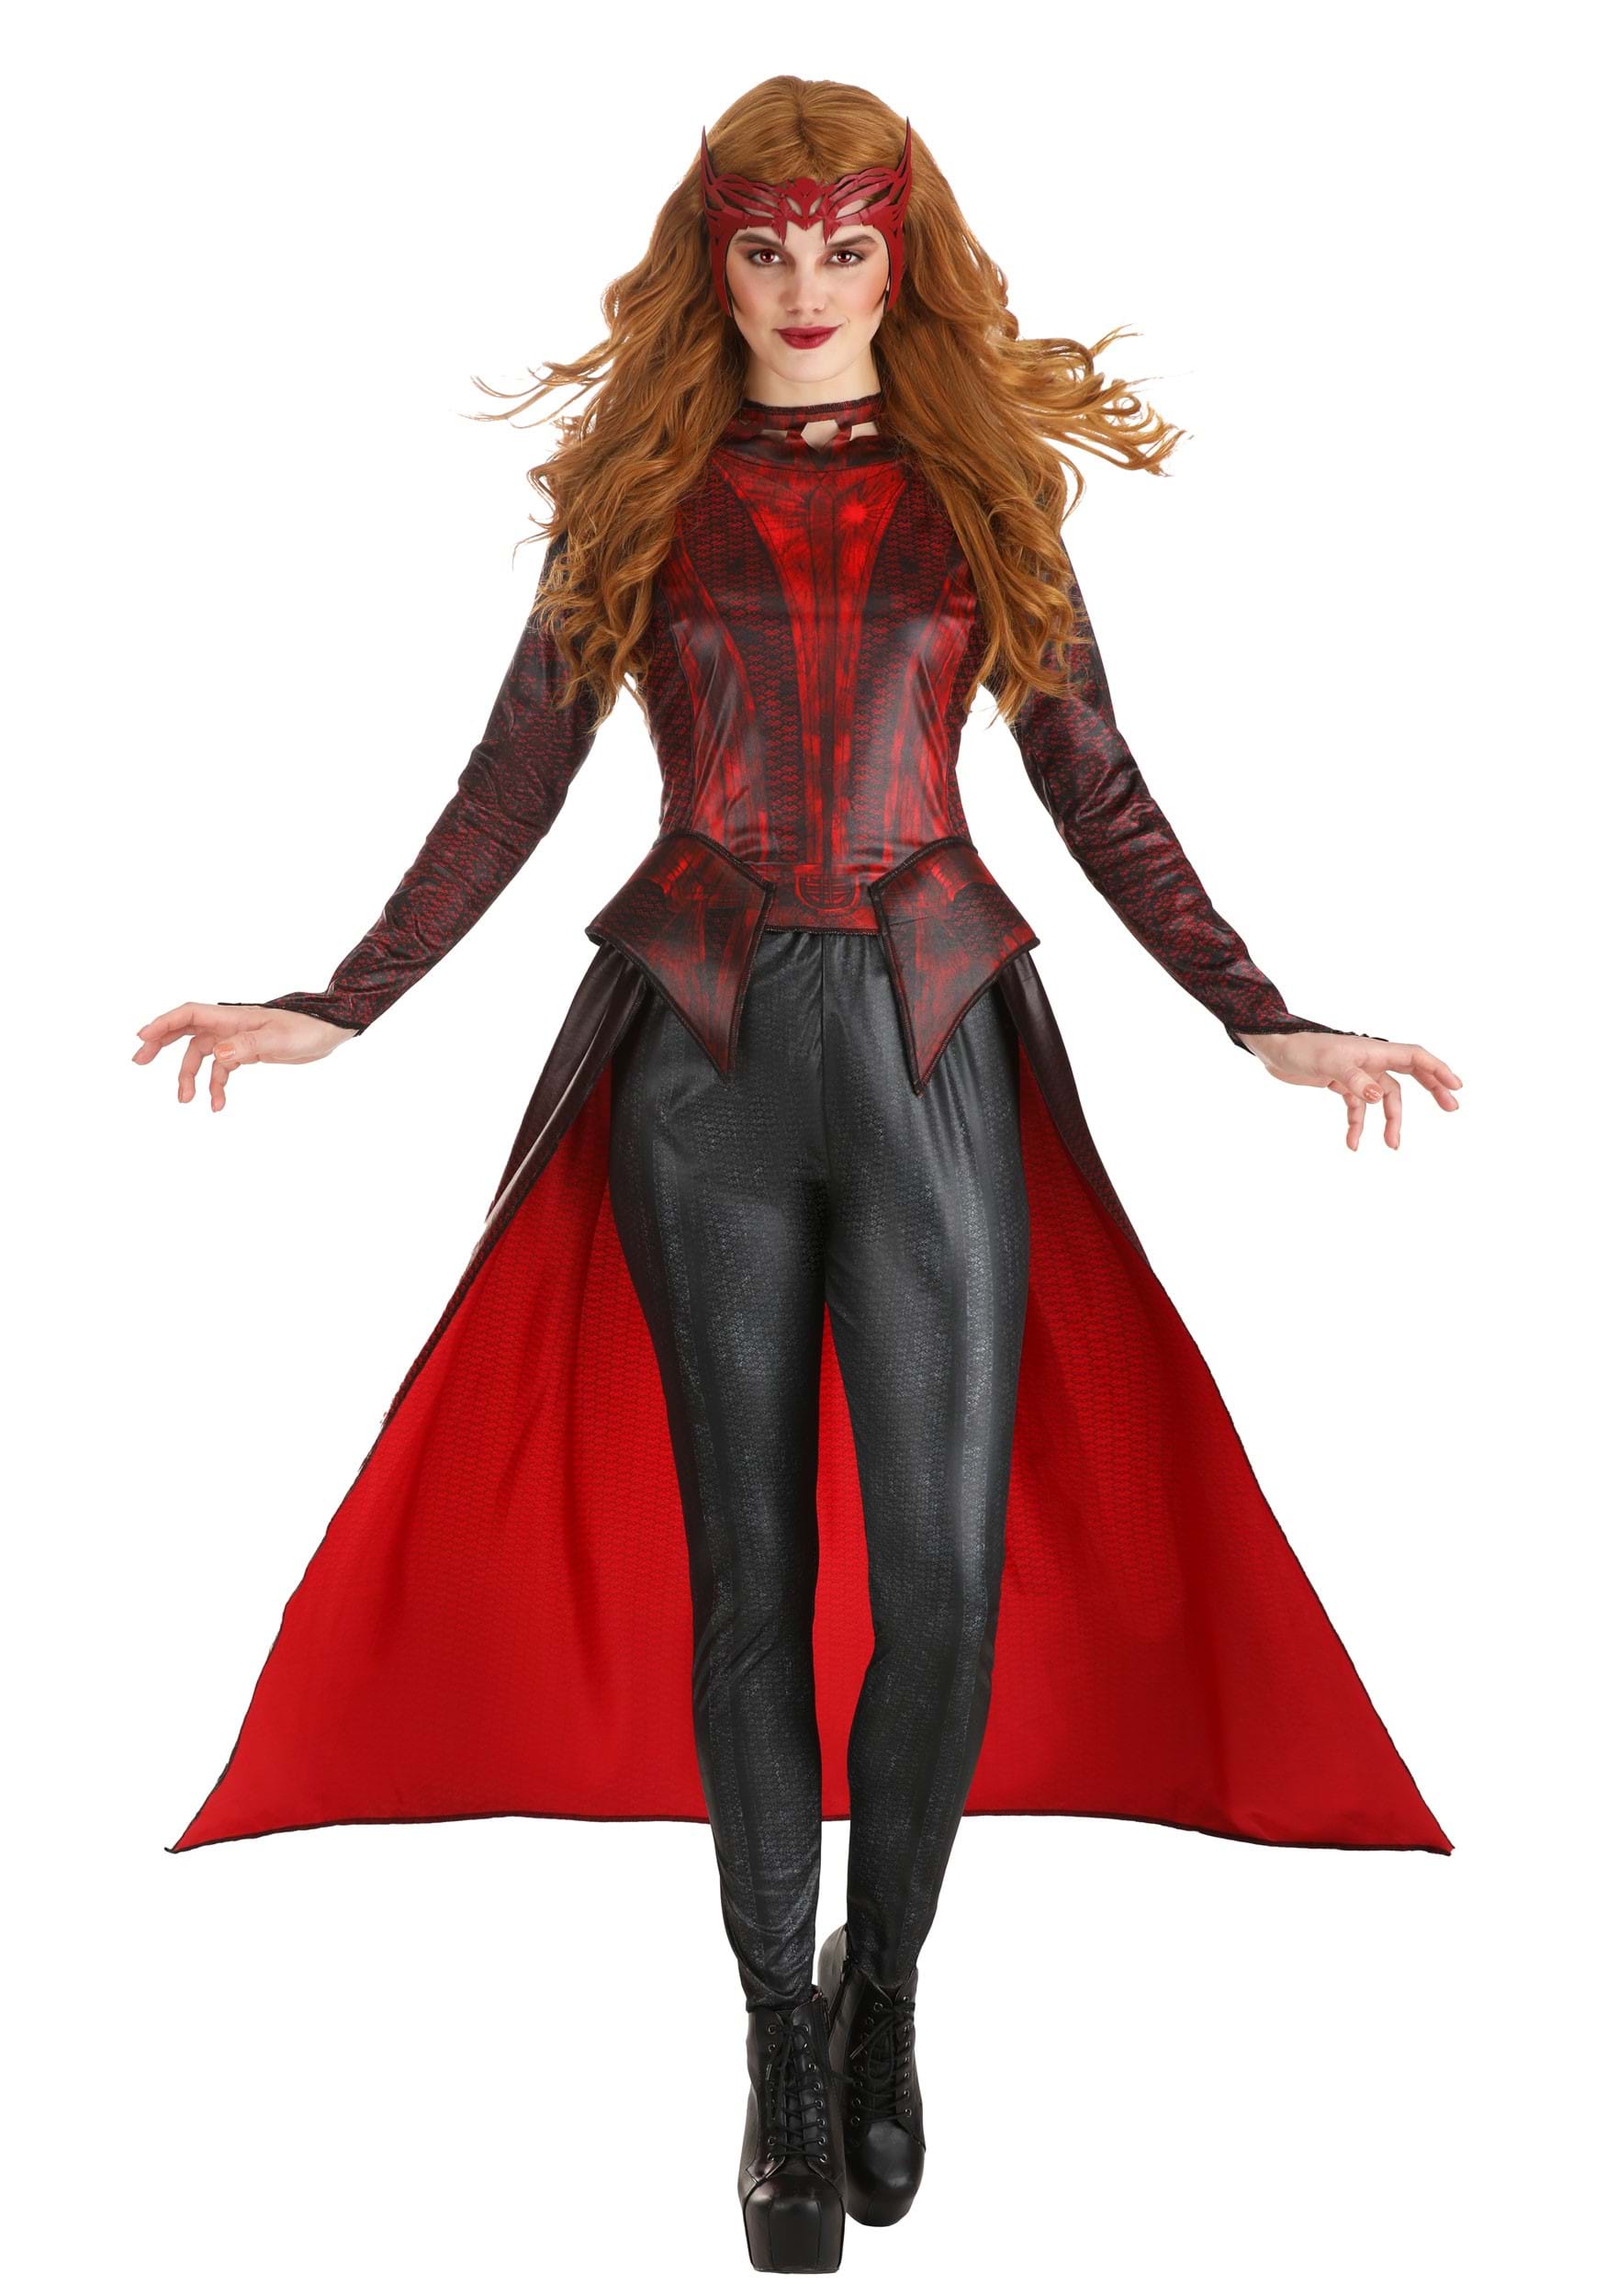 20.) Women's Scarlet Witch Hero Quality Costume